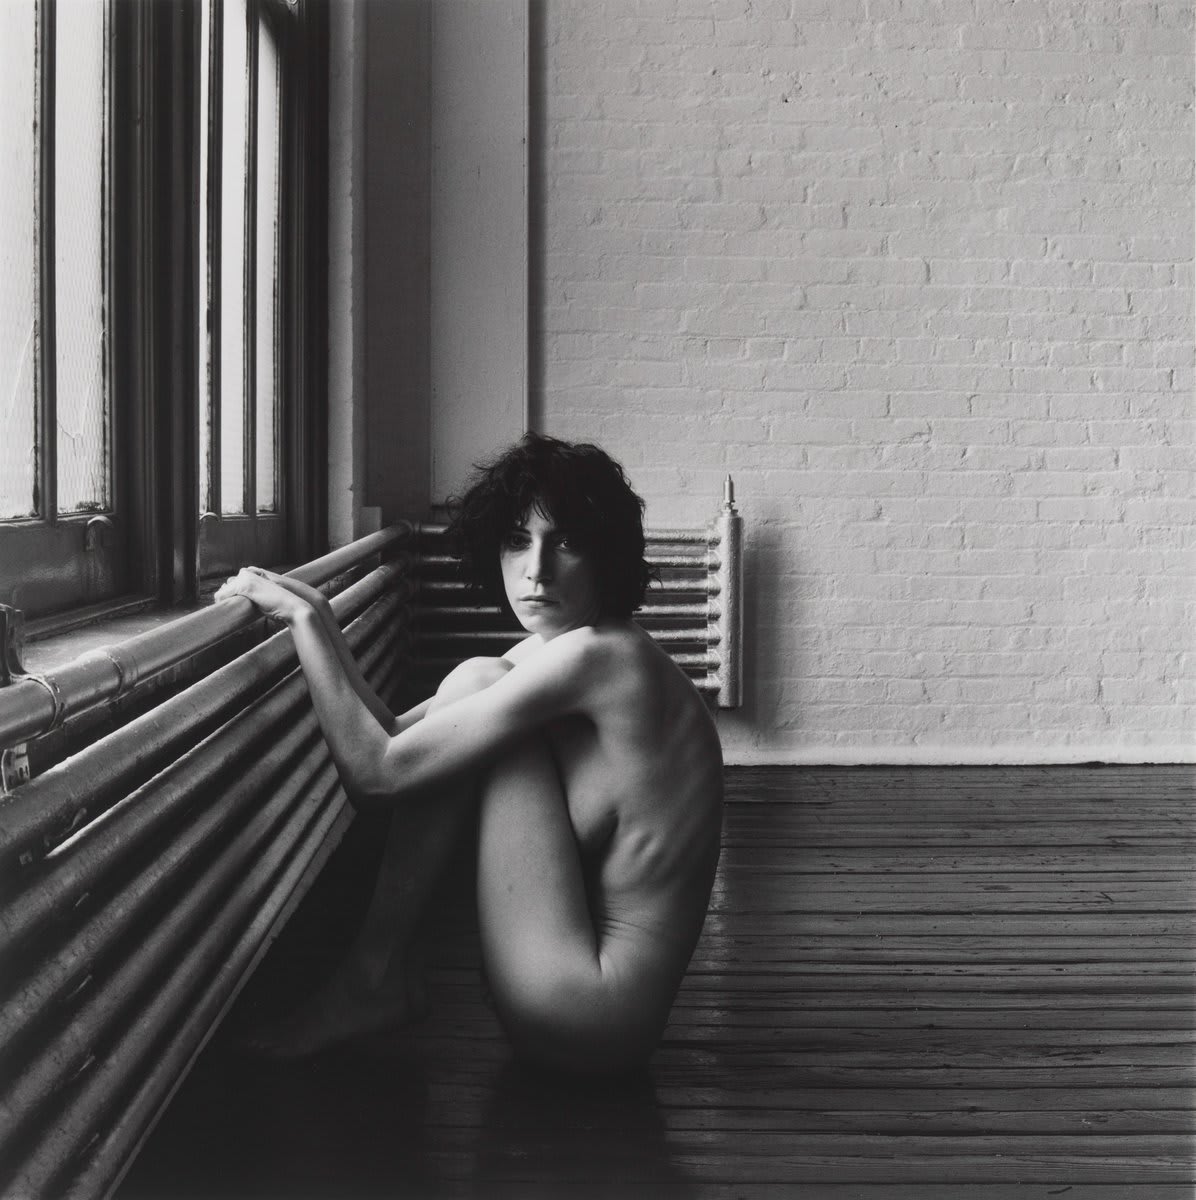 During MapplethorpeMondays, we’re highlighting works from “Implicit Tensions: Mapplethorpe Now,” on view through July 10. Which of Robert Mapplethorpe’s work is intriguing to you?